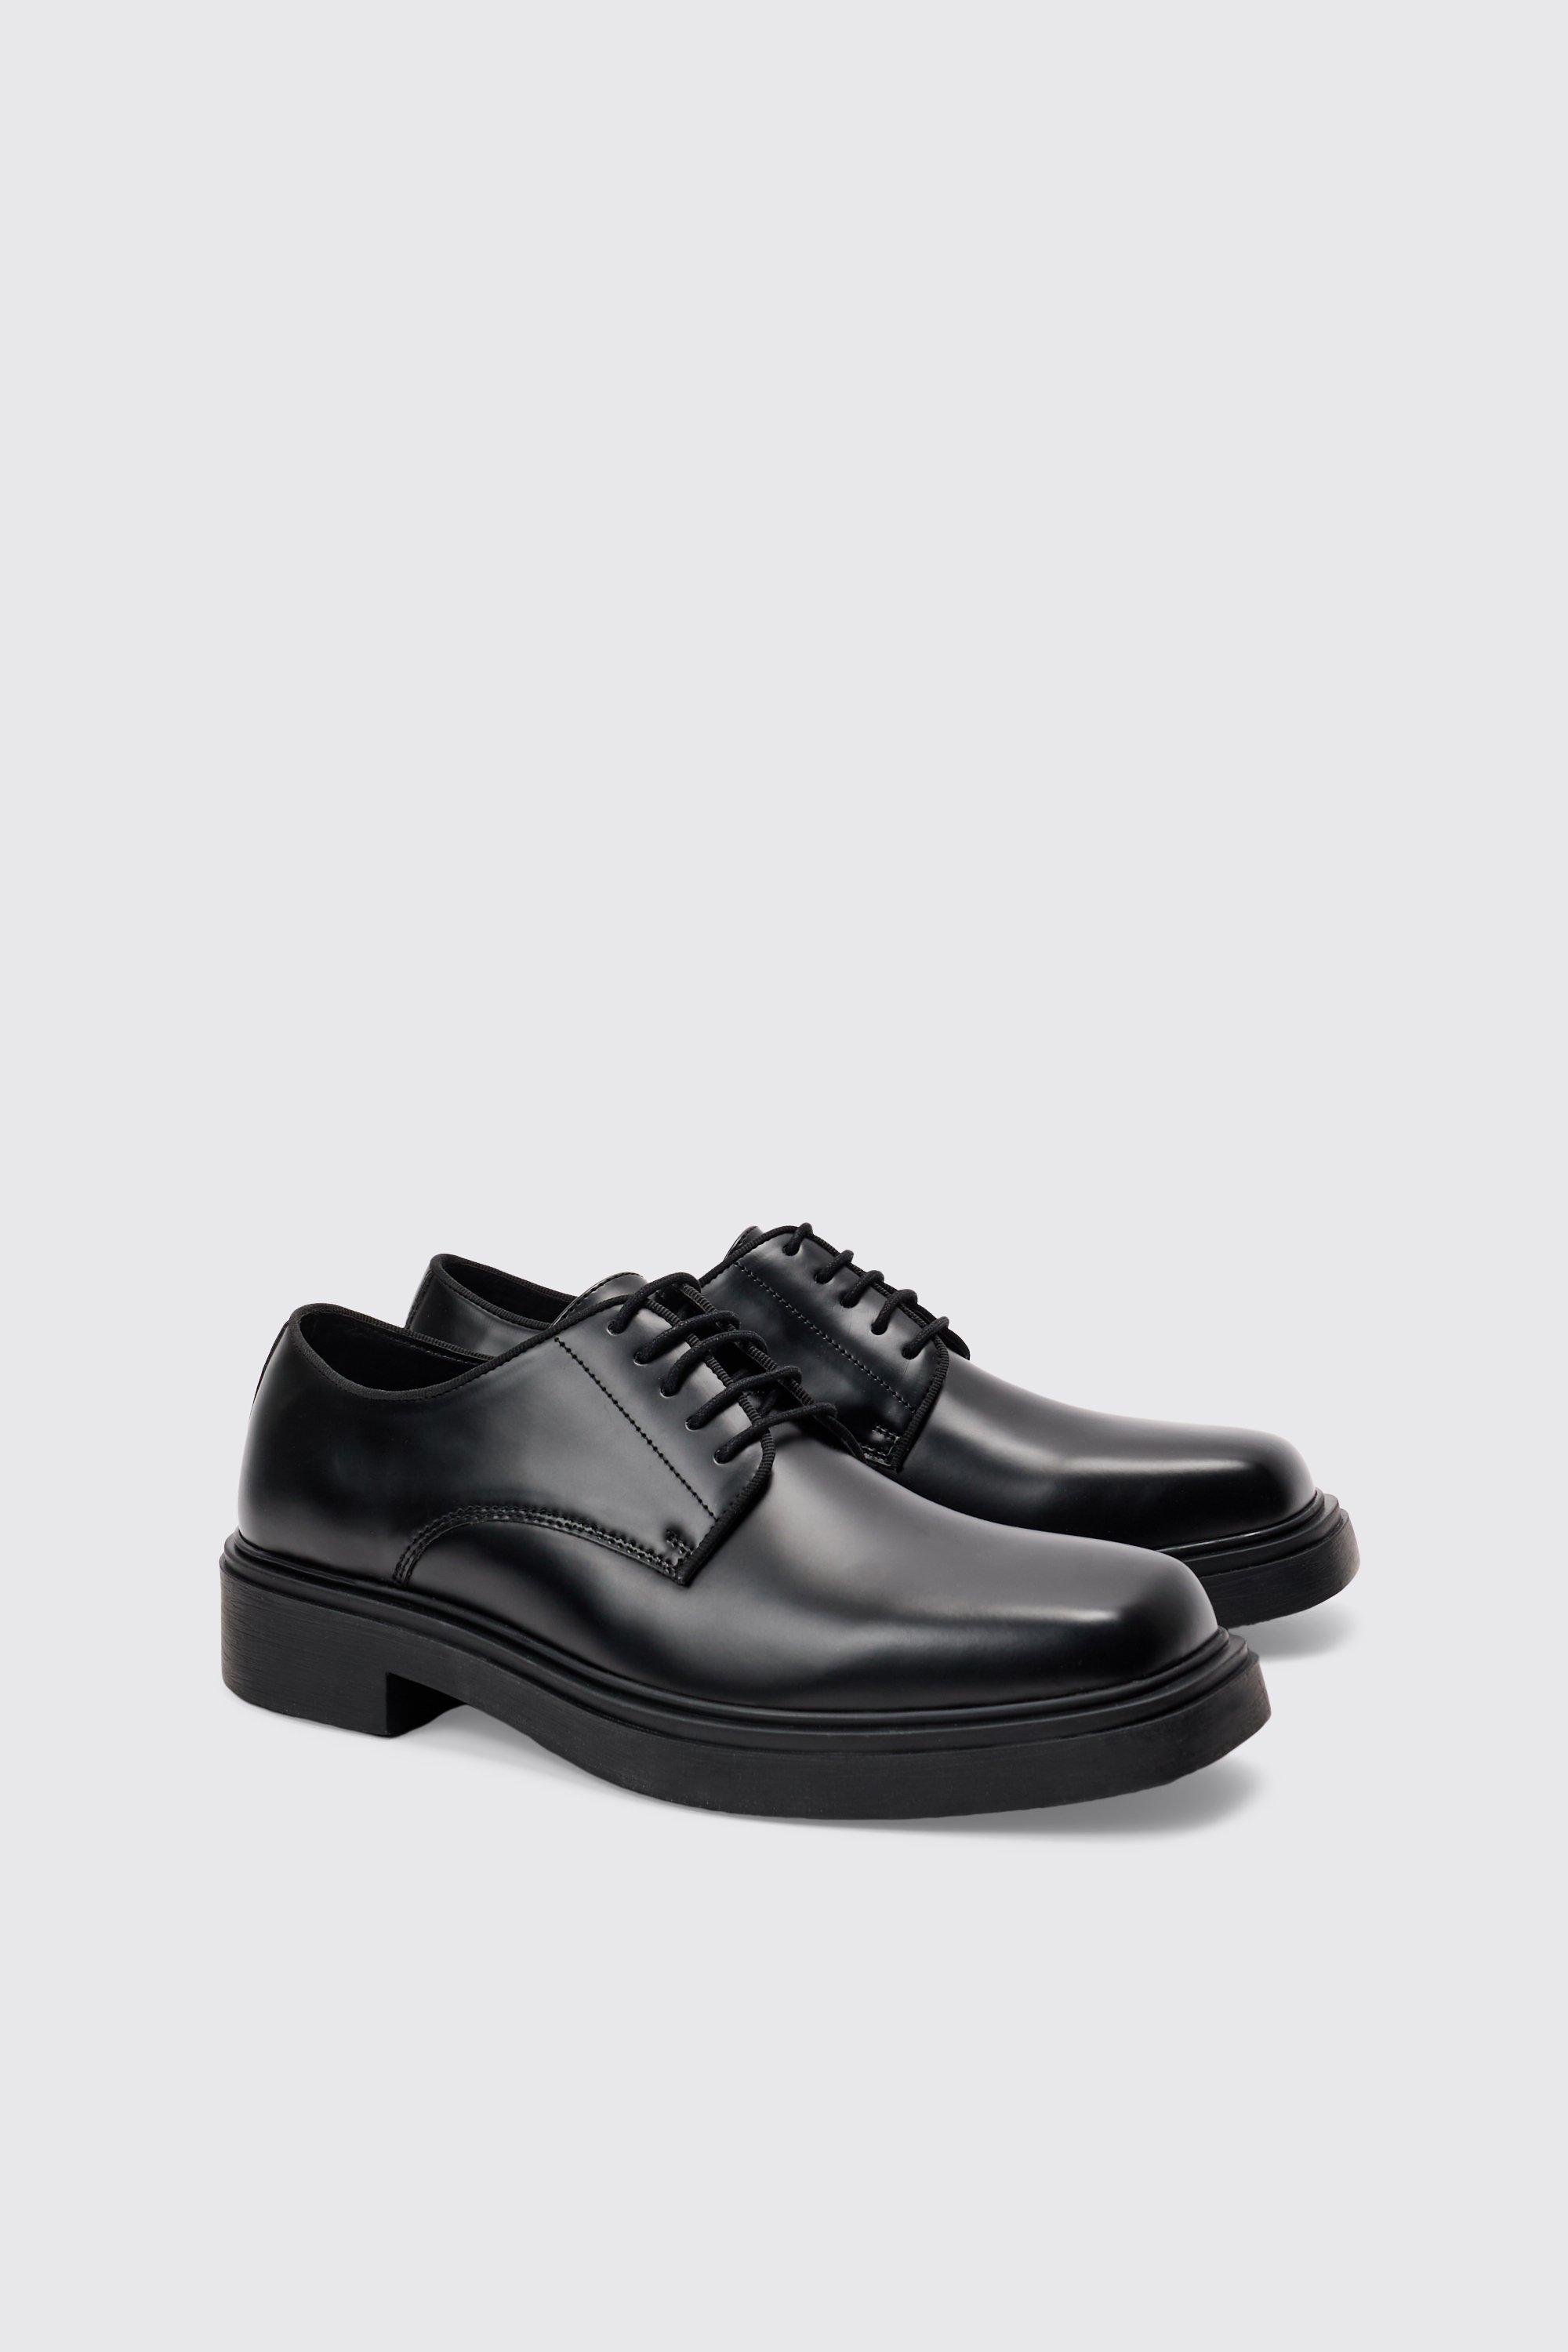 Image of Pu Square Toe Lace Up Loafer In Black, Nero